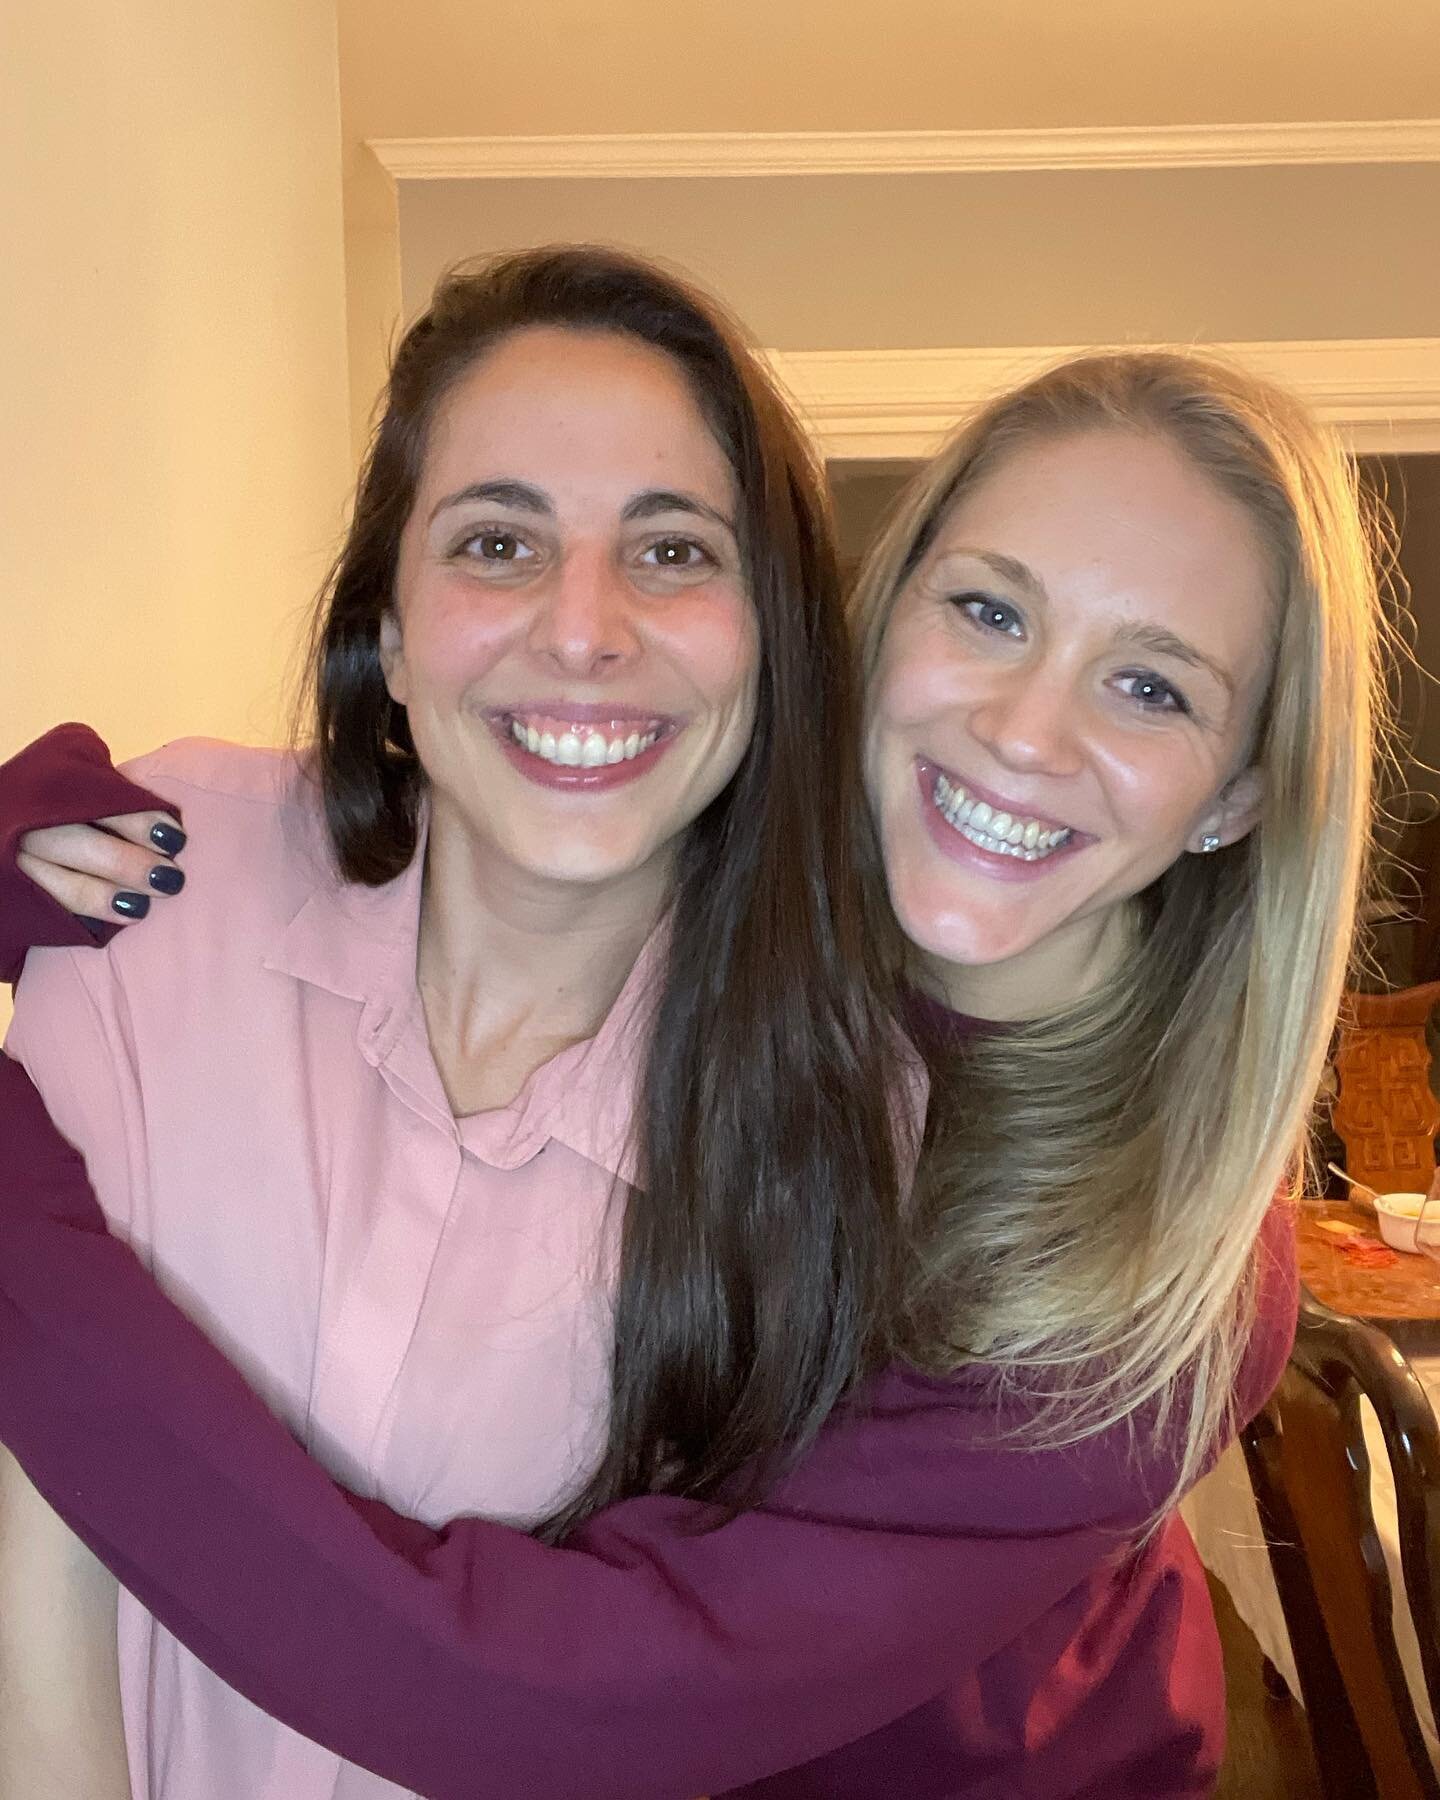 It&rsquo;s one thing to become internet friends&hellip;it&rsquo;s another entirely to spend marathon hangout sessions at each other&rsquo;s homes, to attend each other&rsquo;s weddings, and to start a podcast together! Who is the friend you met onlin